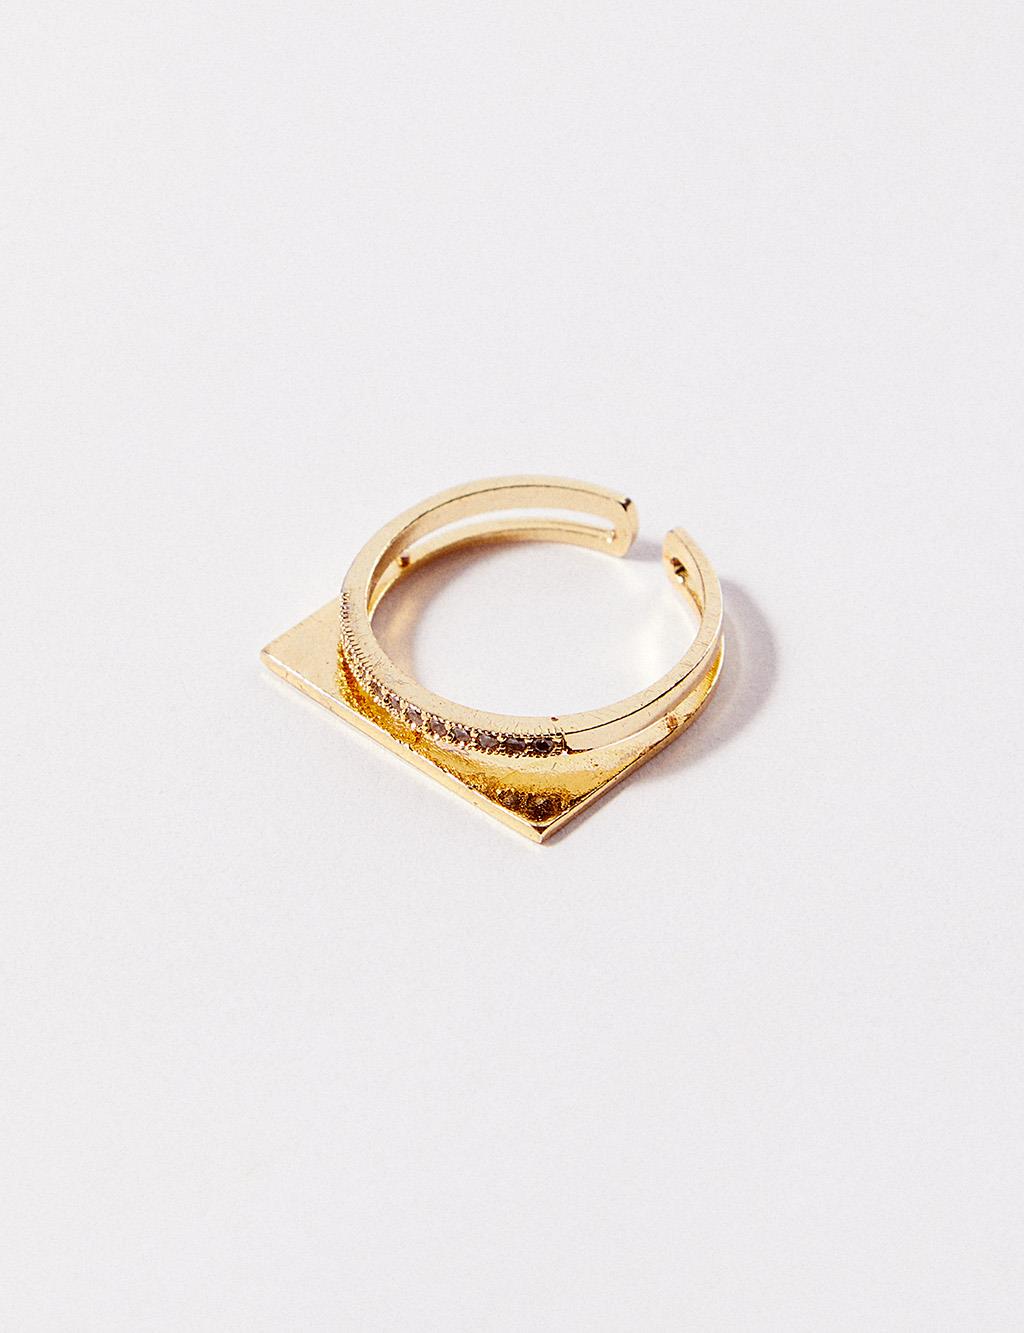 Adjustable Stone Ring Gold Color